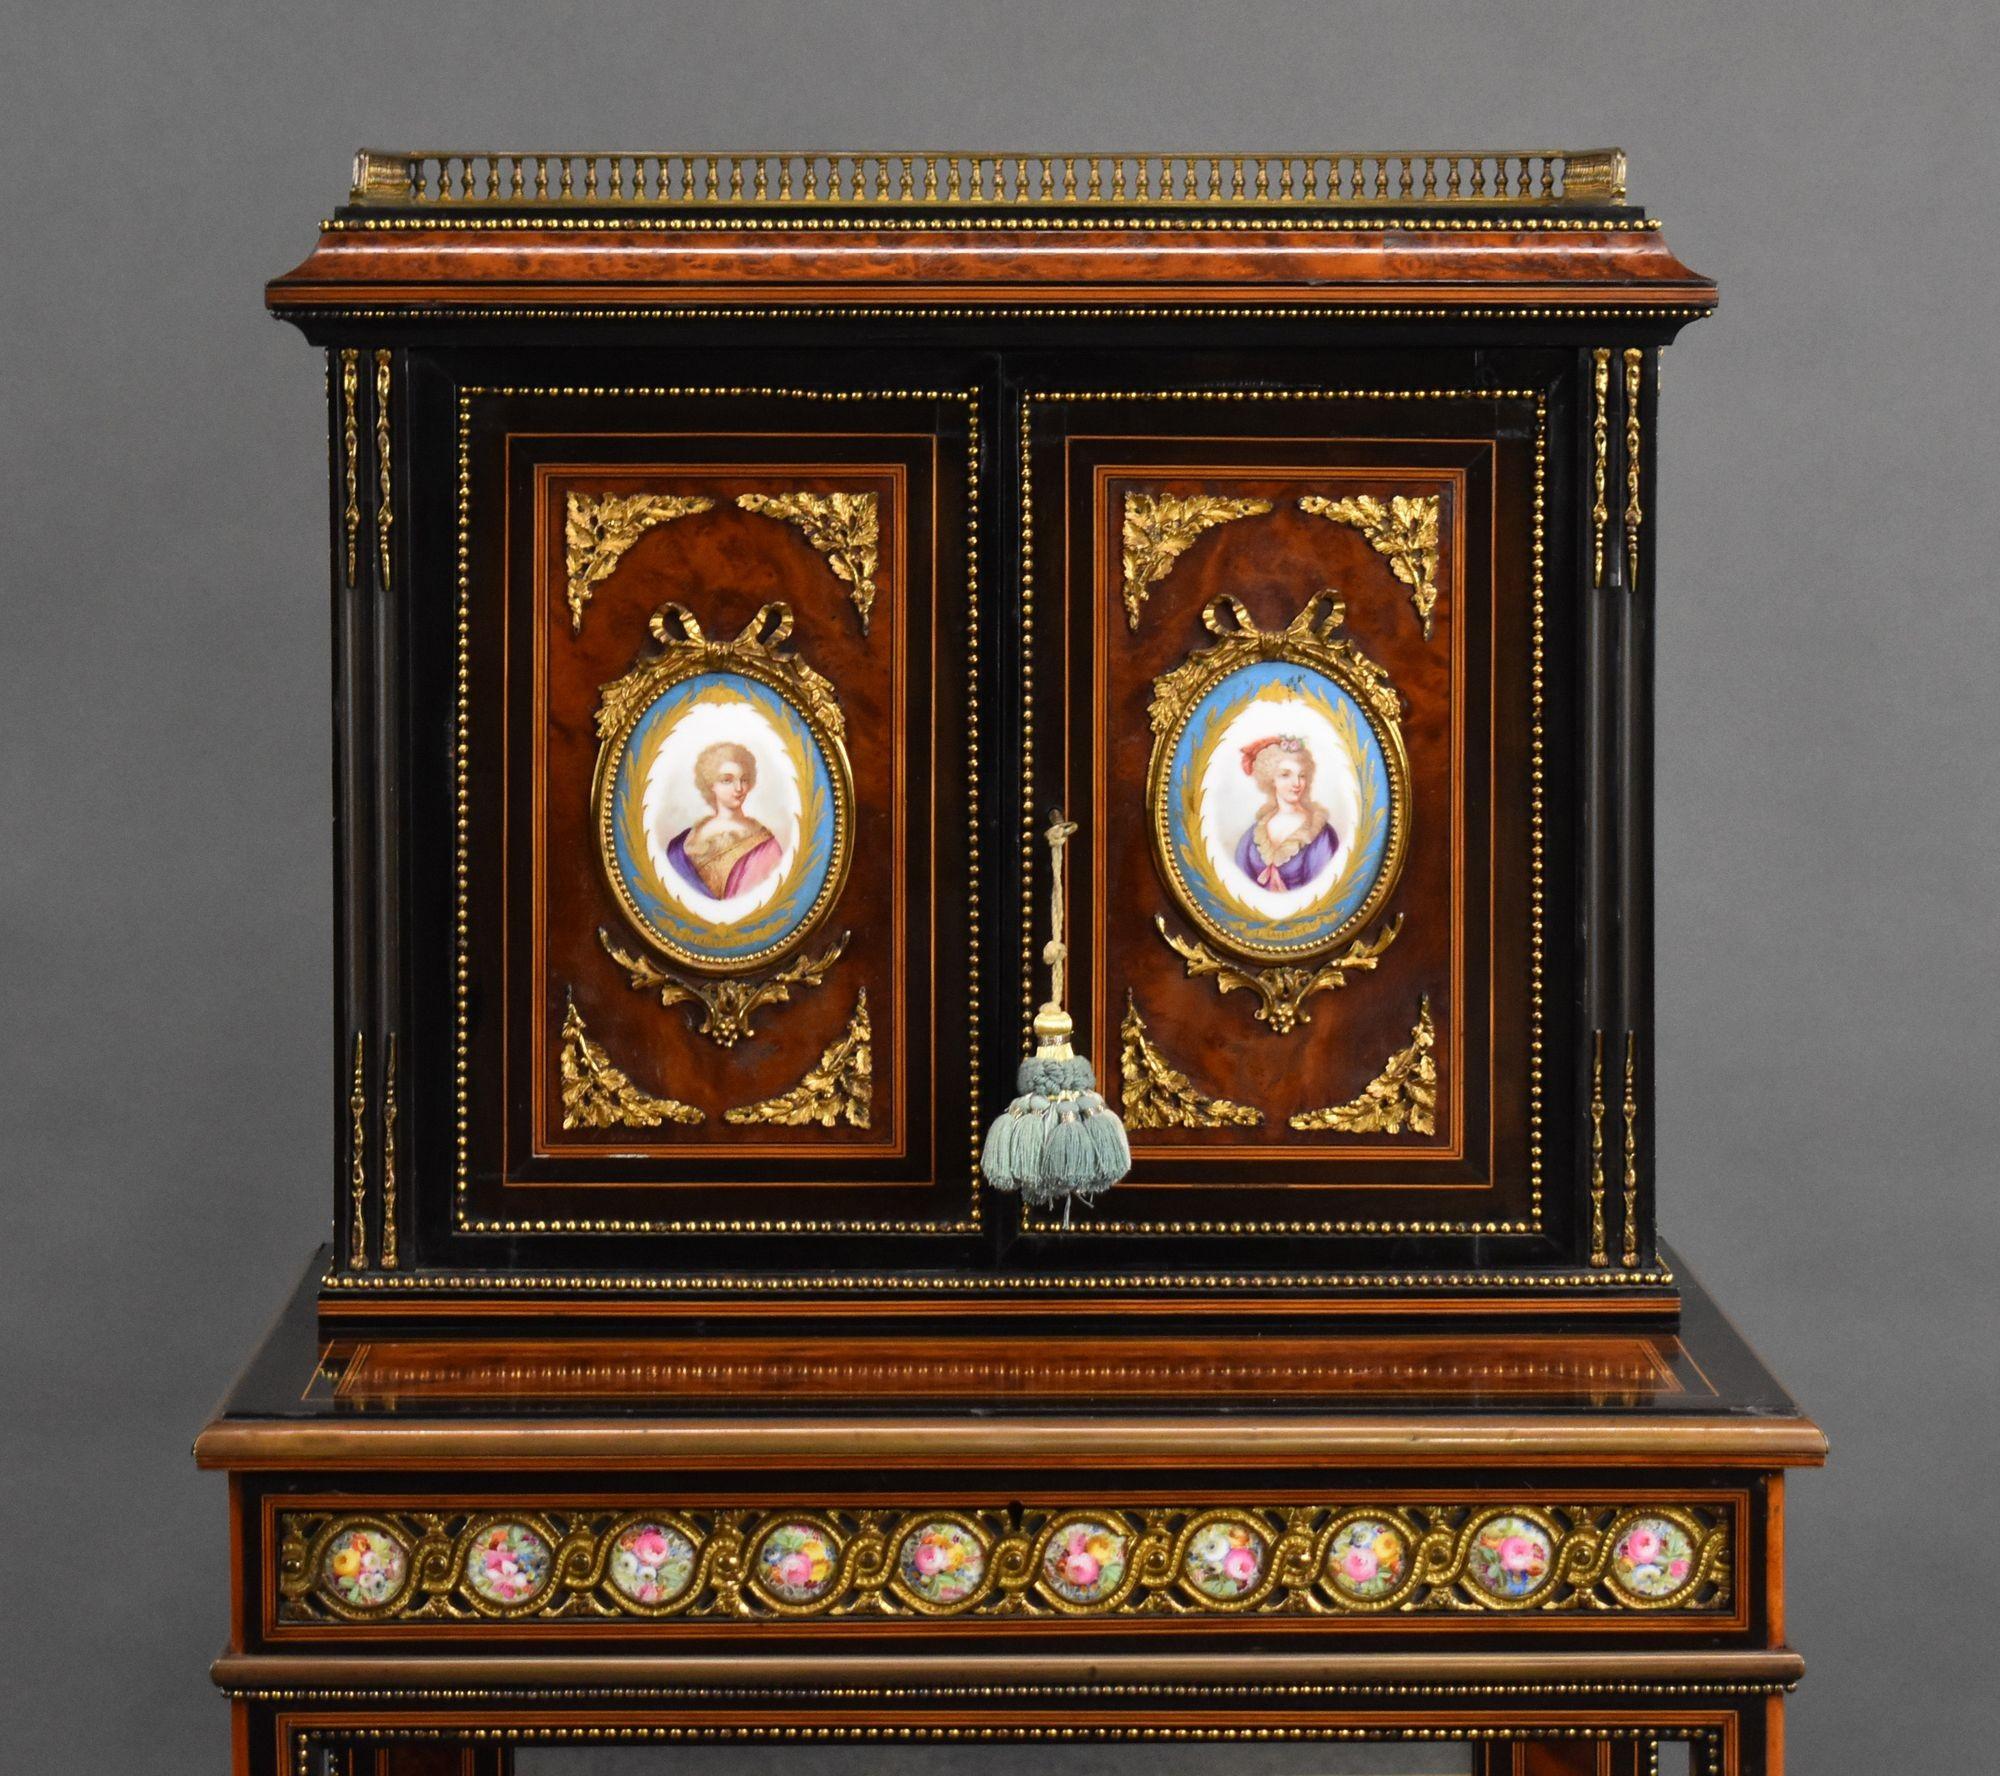 For sale is a French 19th century Amboyna and Ebony Cabinet, with three quarter balustrade gallery, above two panelled doors set with Paris porcelain portrait panels upon a two tier open Stand with gilt metal mounts and a porcelain panelled frieze.